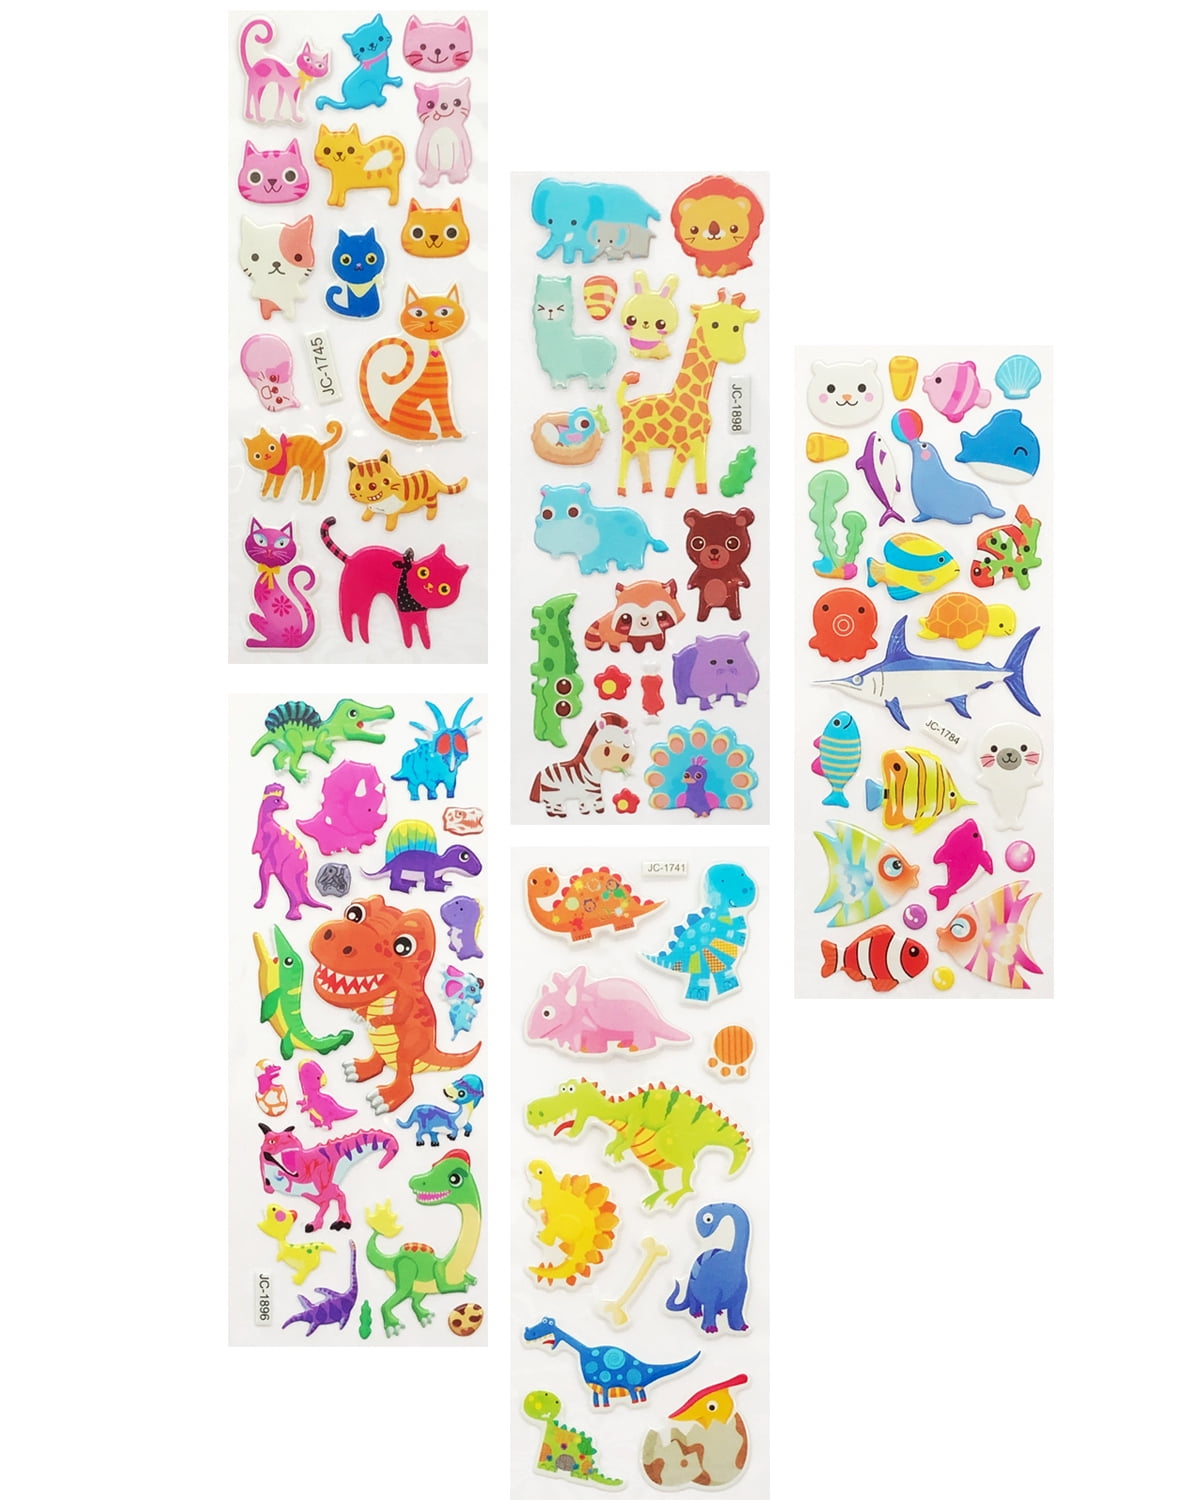 Wrapables 3D Puffy Stickers for Scrapbooking, (10 Sheets) Zoo Animals  Kitties Doggies Owls, 10 Sheets - Fred Meyer